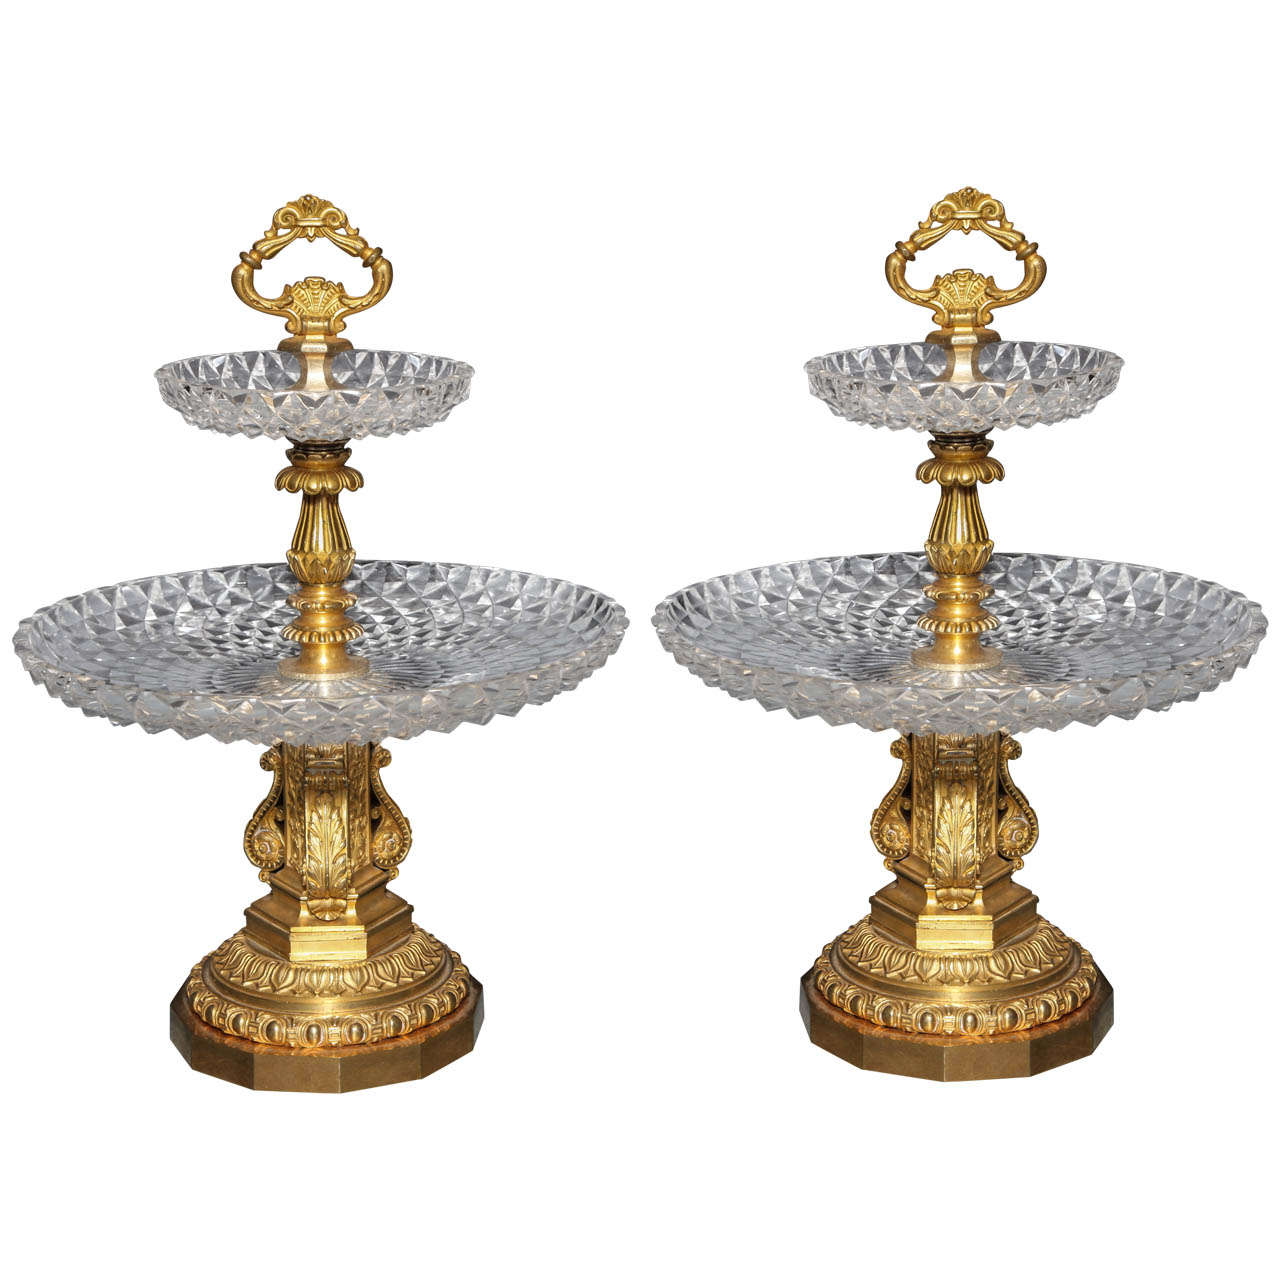 Pair of Antique French Two Tiered Tazzas or Centerpieces by P. Philippe Thomier For Sale